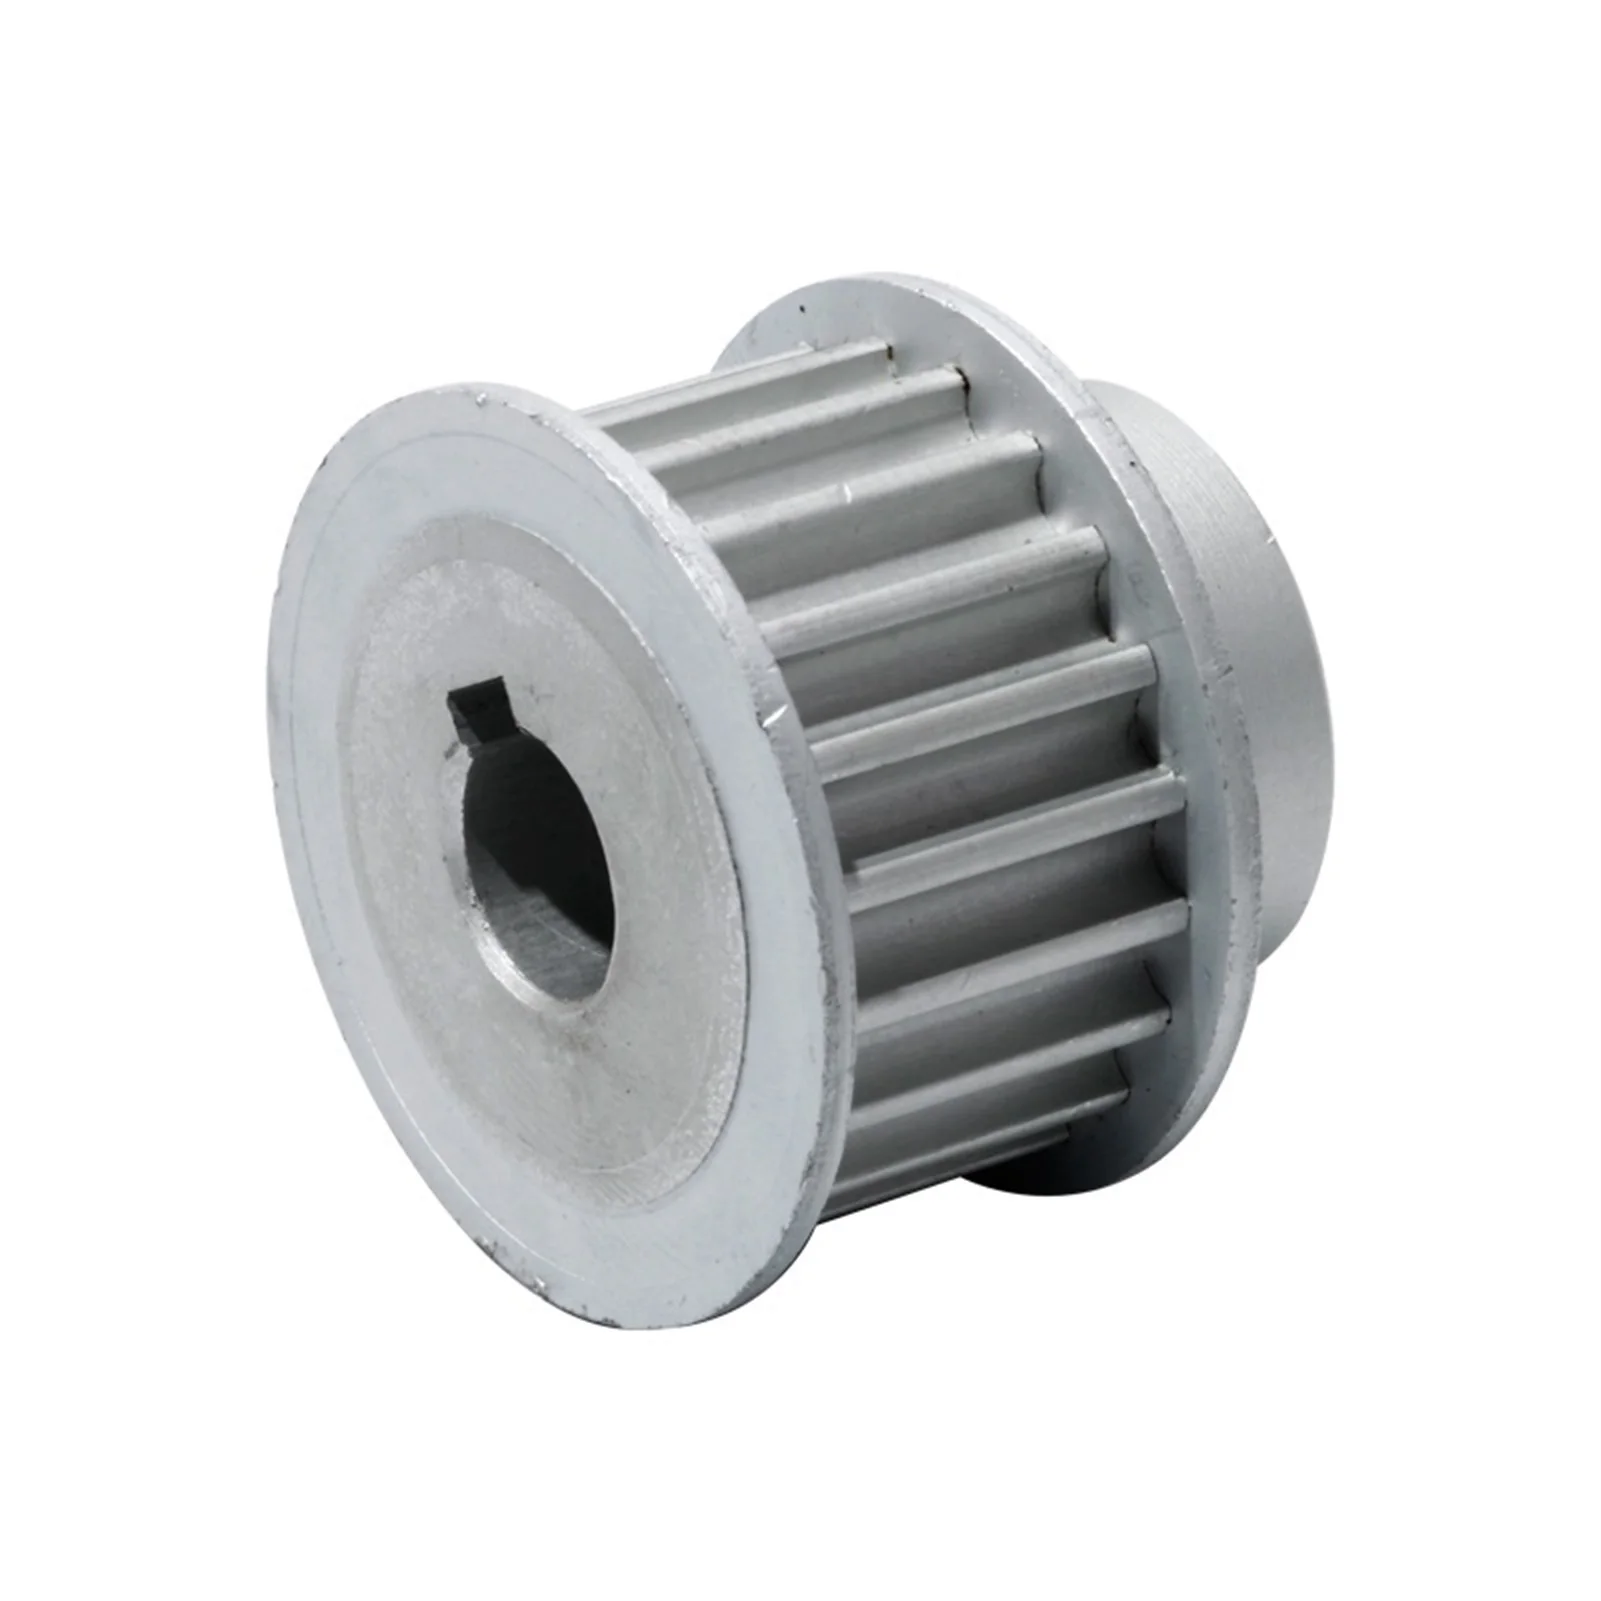 

HTD5M-20T Timing Pulley, With Keyway Transmission Pulley, 16mm Belt Width, 8/10/12/12.7/14/15mm Bore, 5M 20Teeth Gear Belt